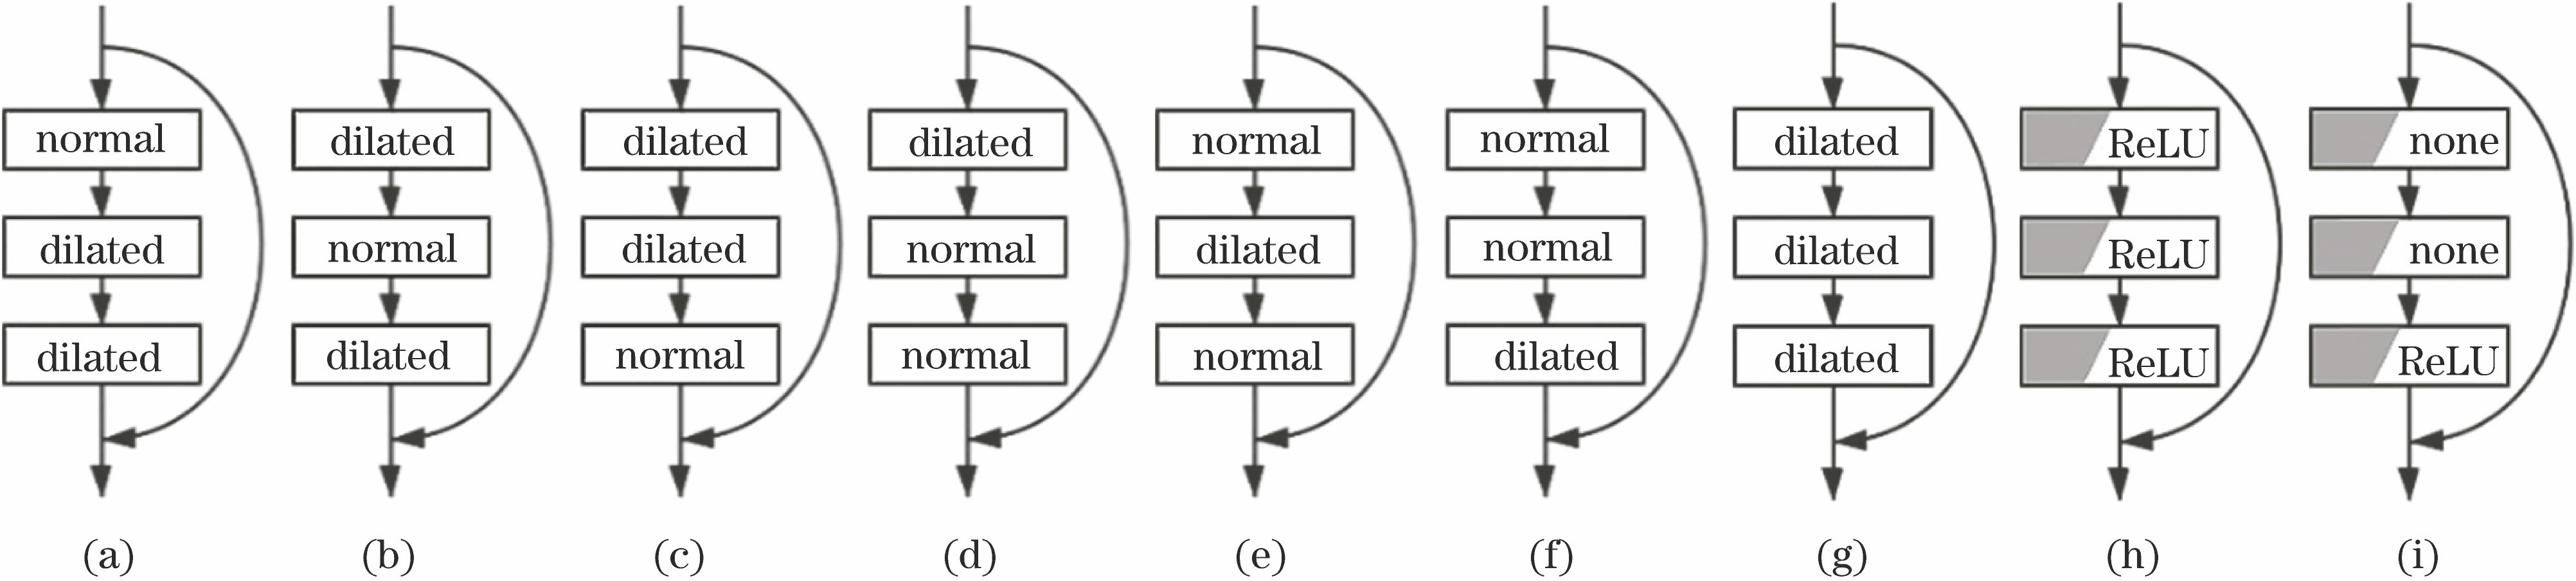 Normal and dilated convolution kernel diagrams. (a) Normal kernel; (b) dilated kernel (r=2)